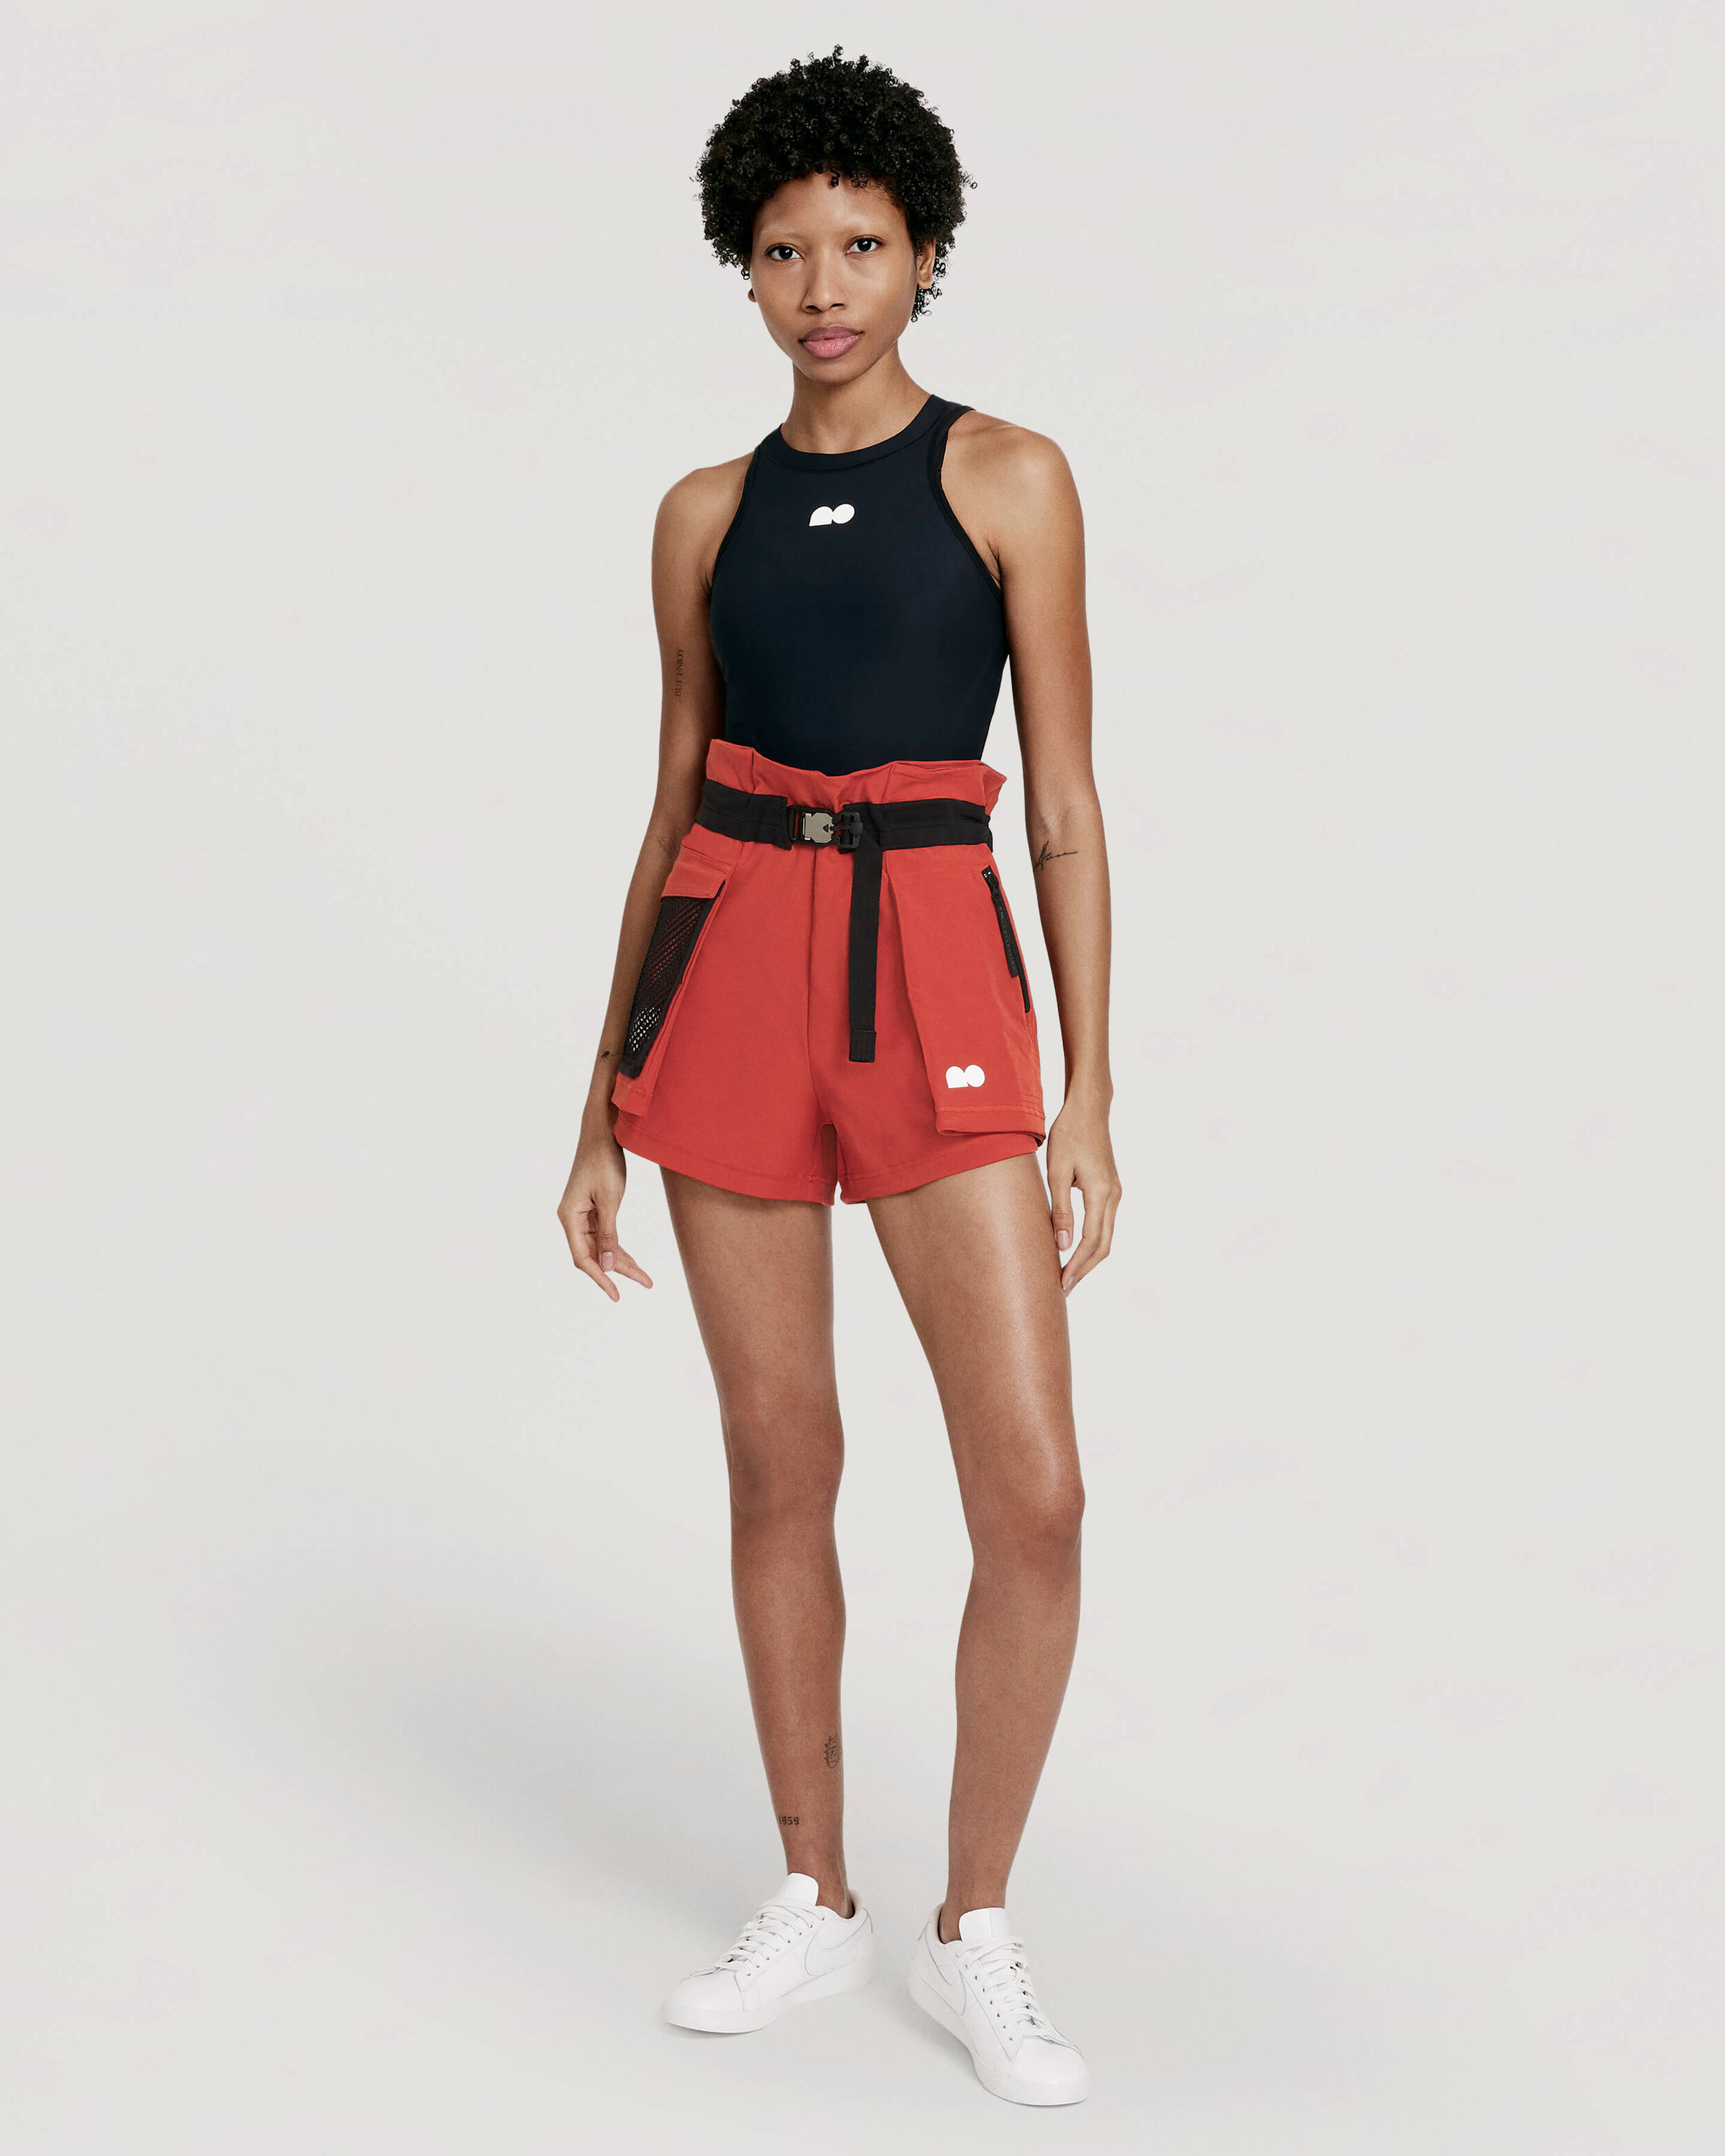 Nike x Naomi Osaka Capsule Collection | First Look — CNK Daily ...